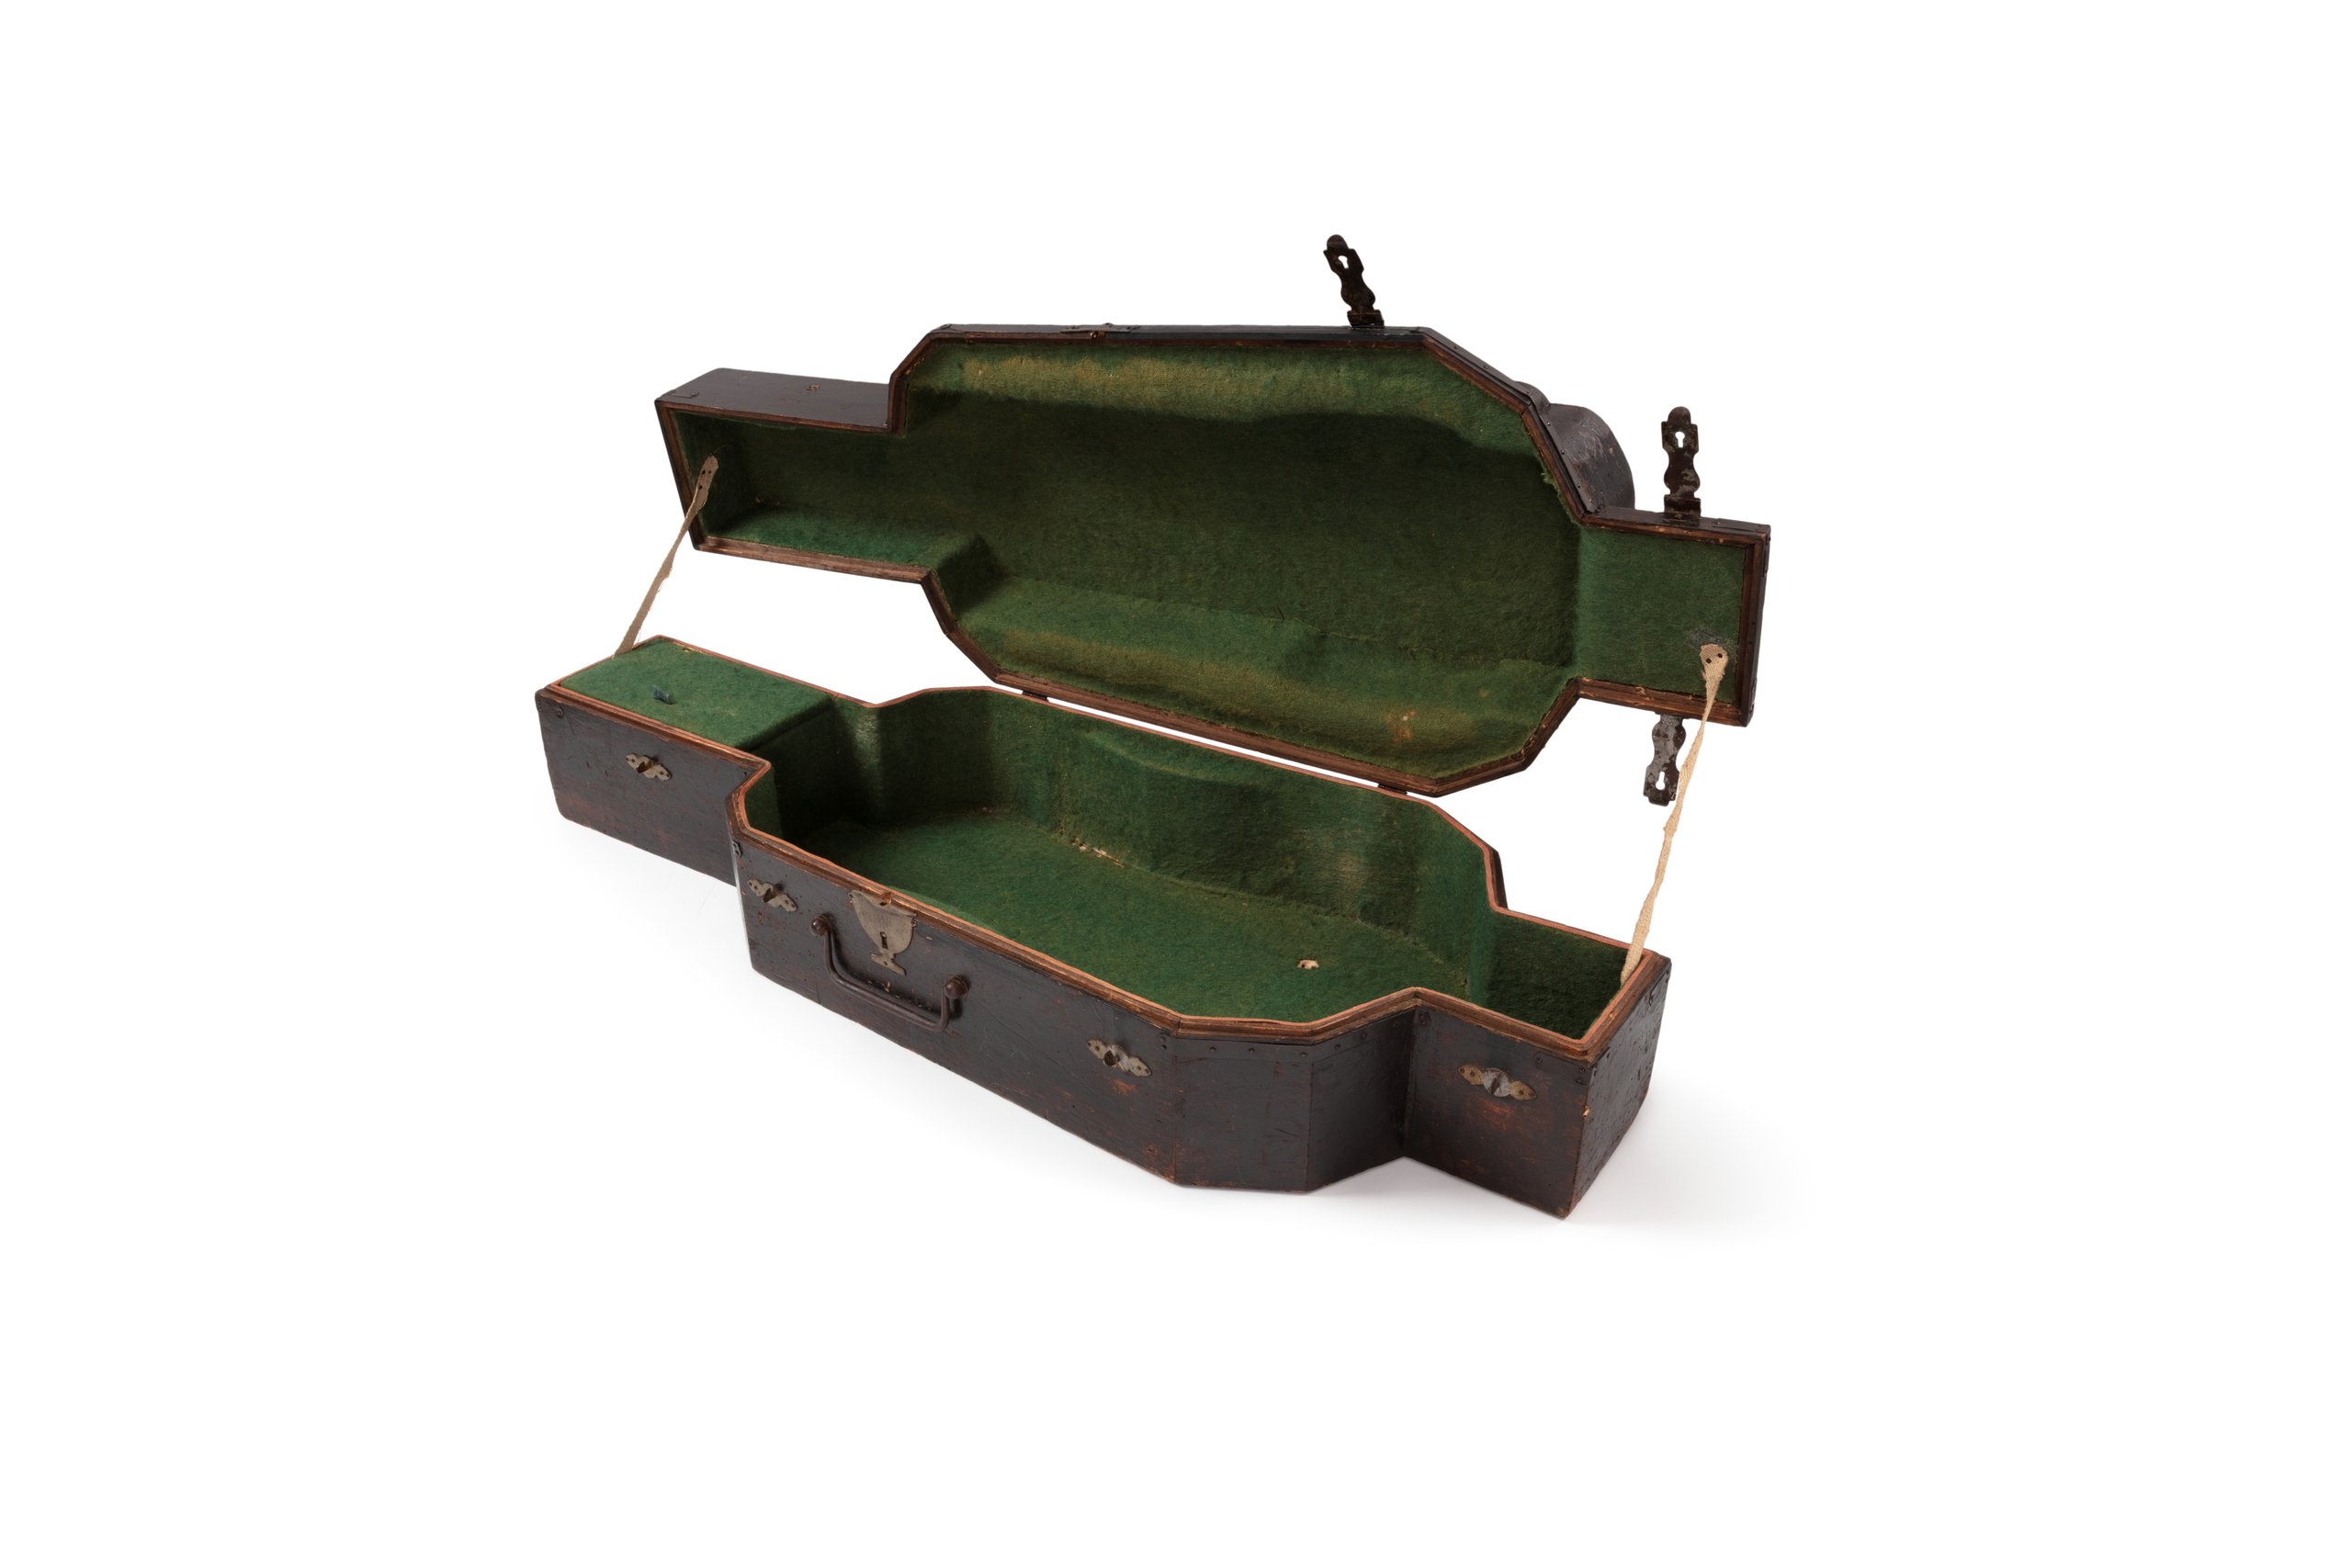 Mellophone and case by Brown & Cleric, France